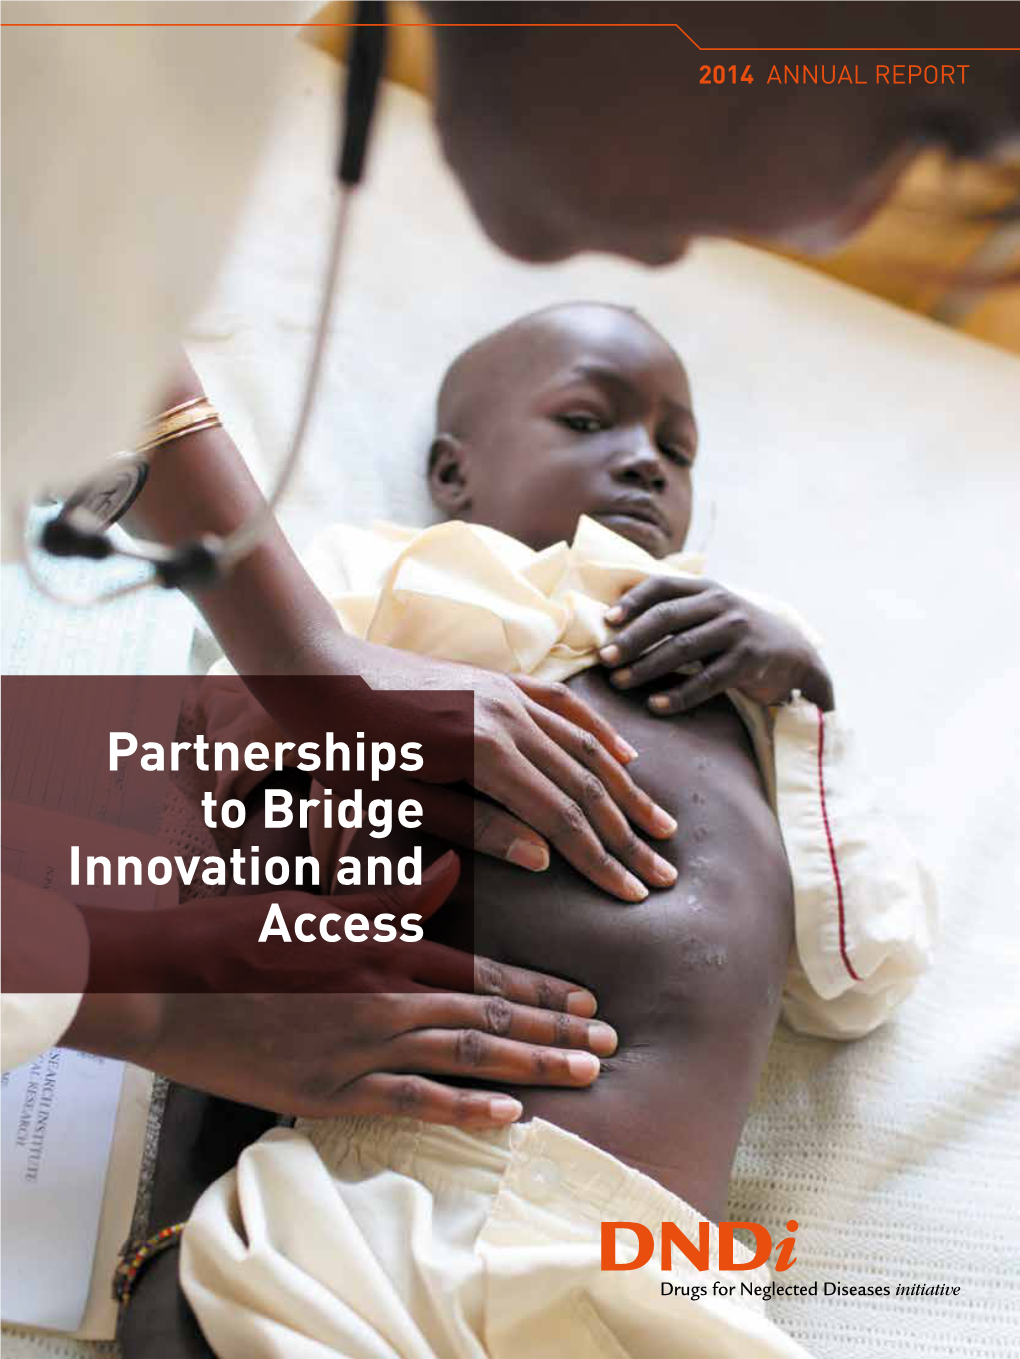 Partnerships to Bridge Innovation and Access